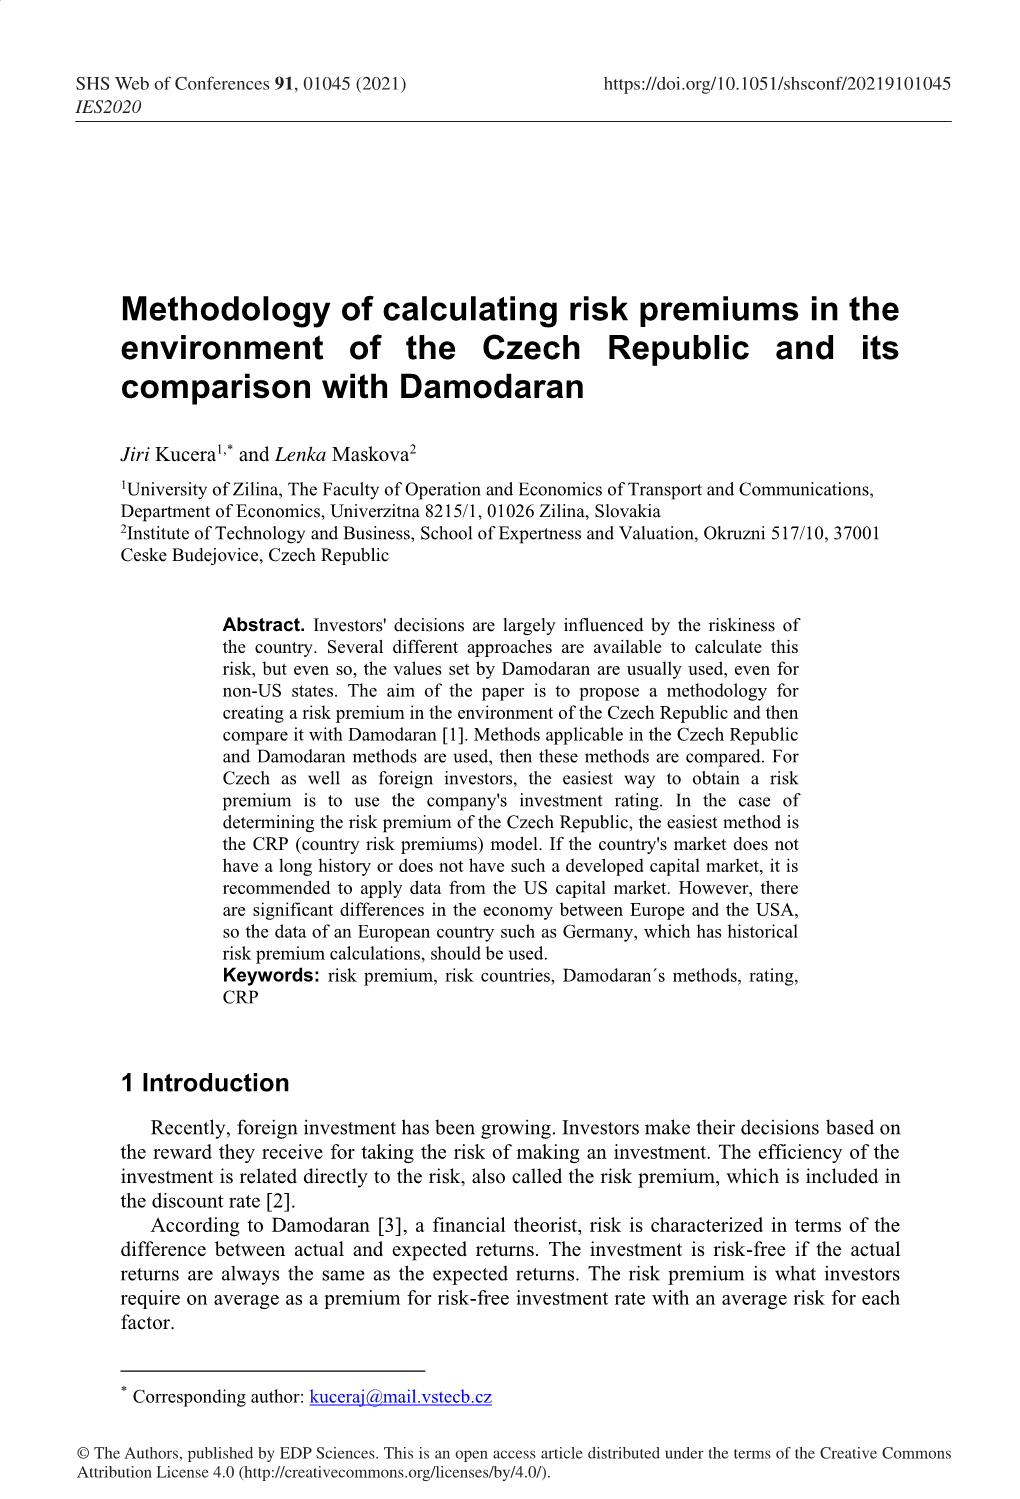 Methodology of Calculating Risk Premiums in the Environment of the Czech Republic and Its Comparison with Damodaran